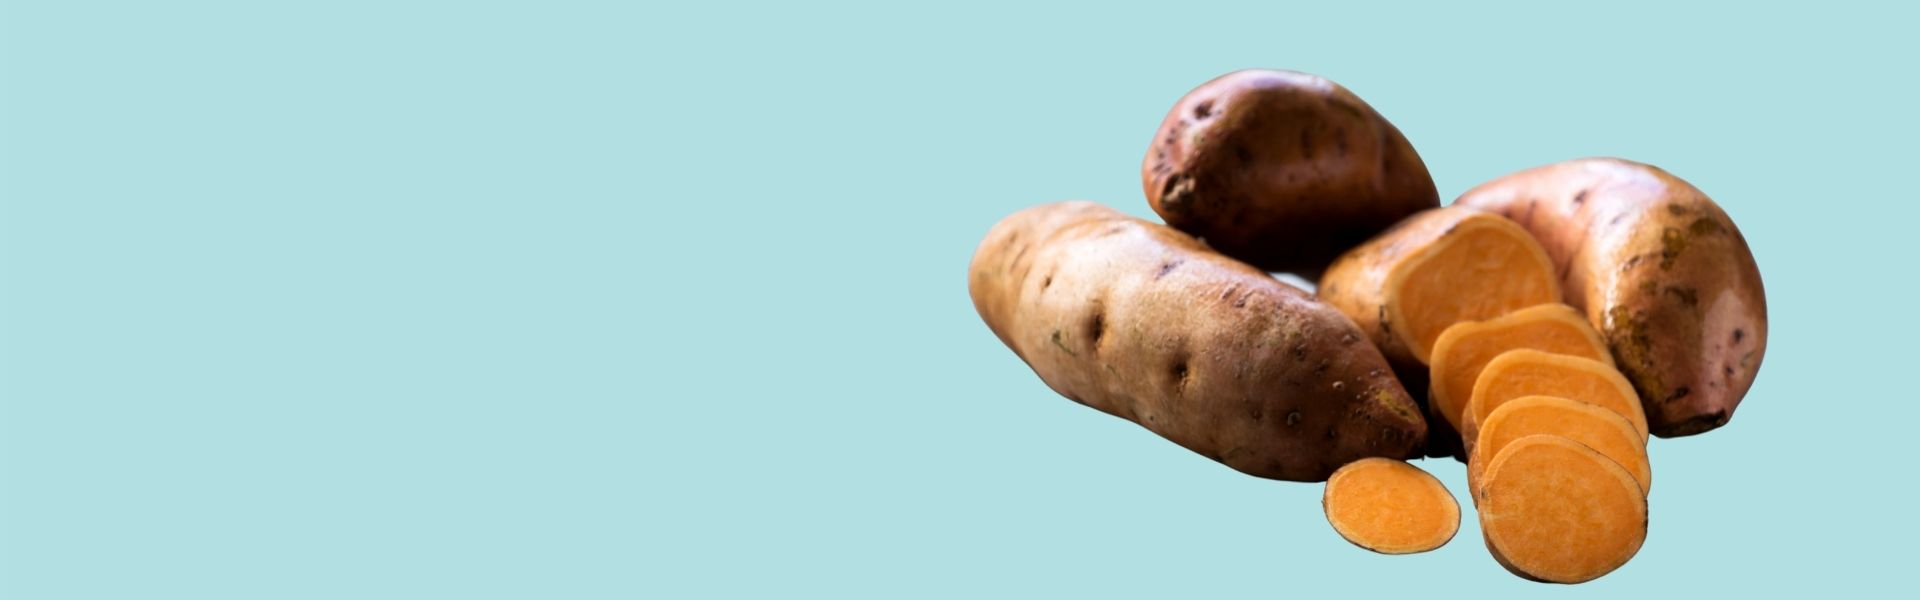 Sweet potatoes: How to cook them the healthy way